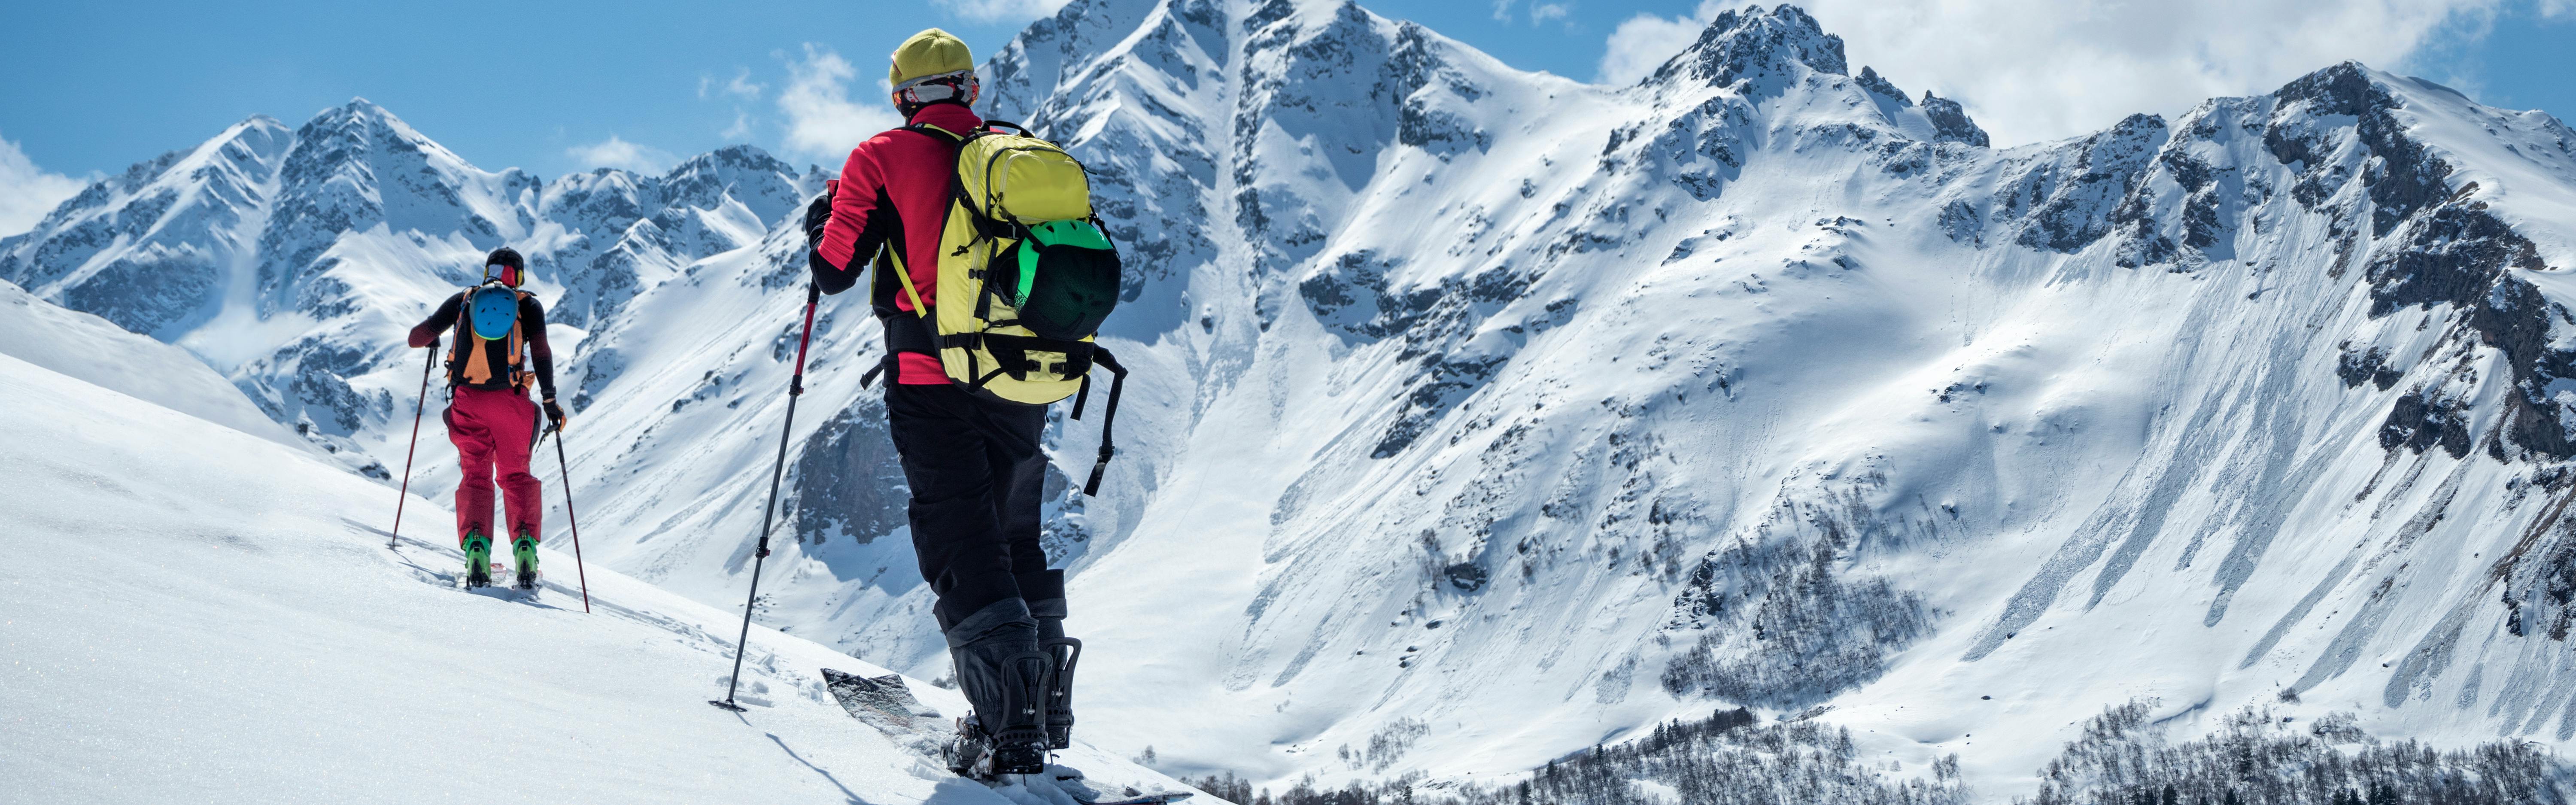 Ski Mountaineering: Gear List & Tips to Get Started